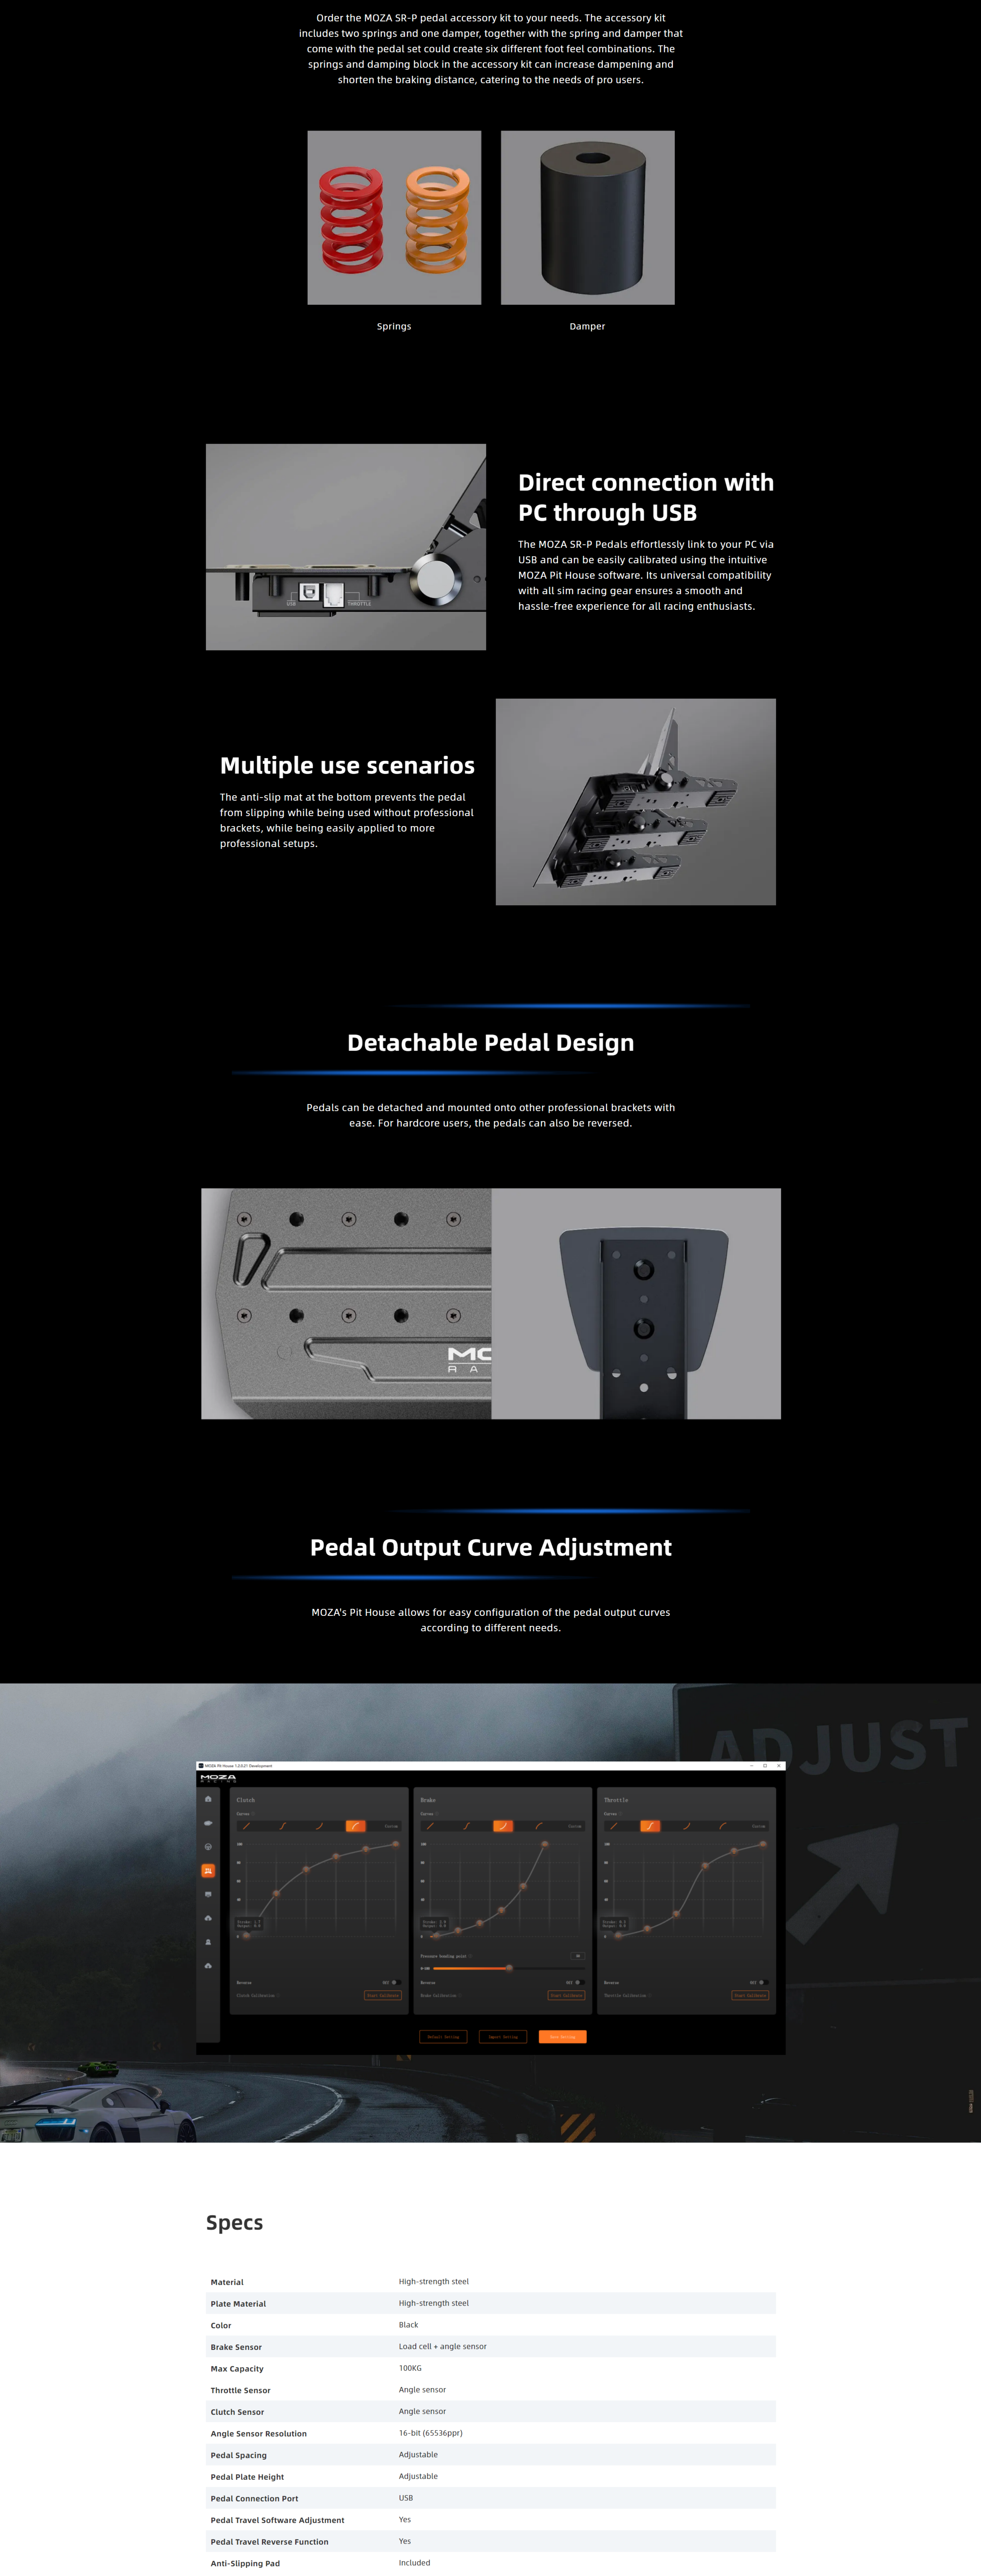 A large marketing image providing additional information about the product MOZA SR-P Throttle & Brake Pedal Set - Additional alt info not provided